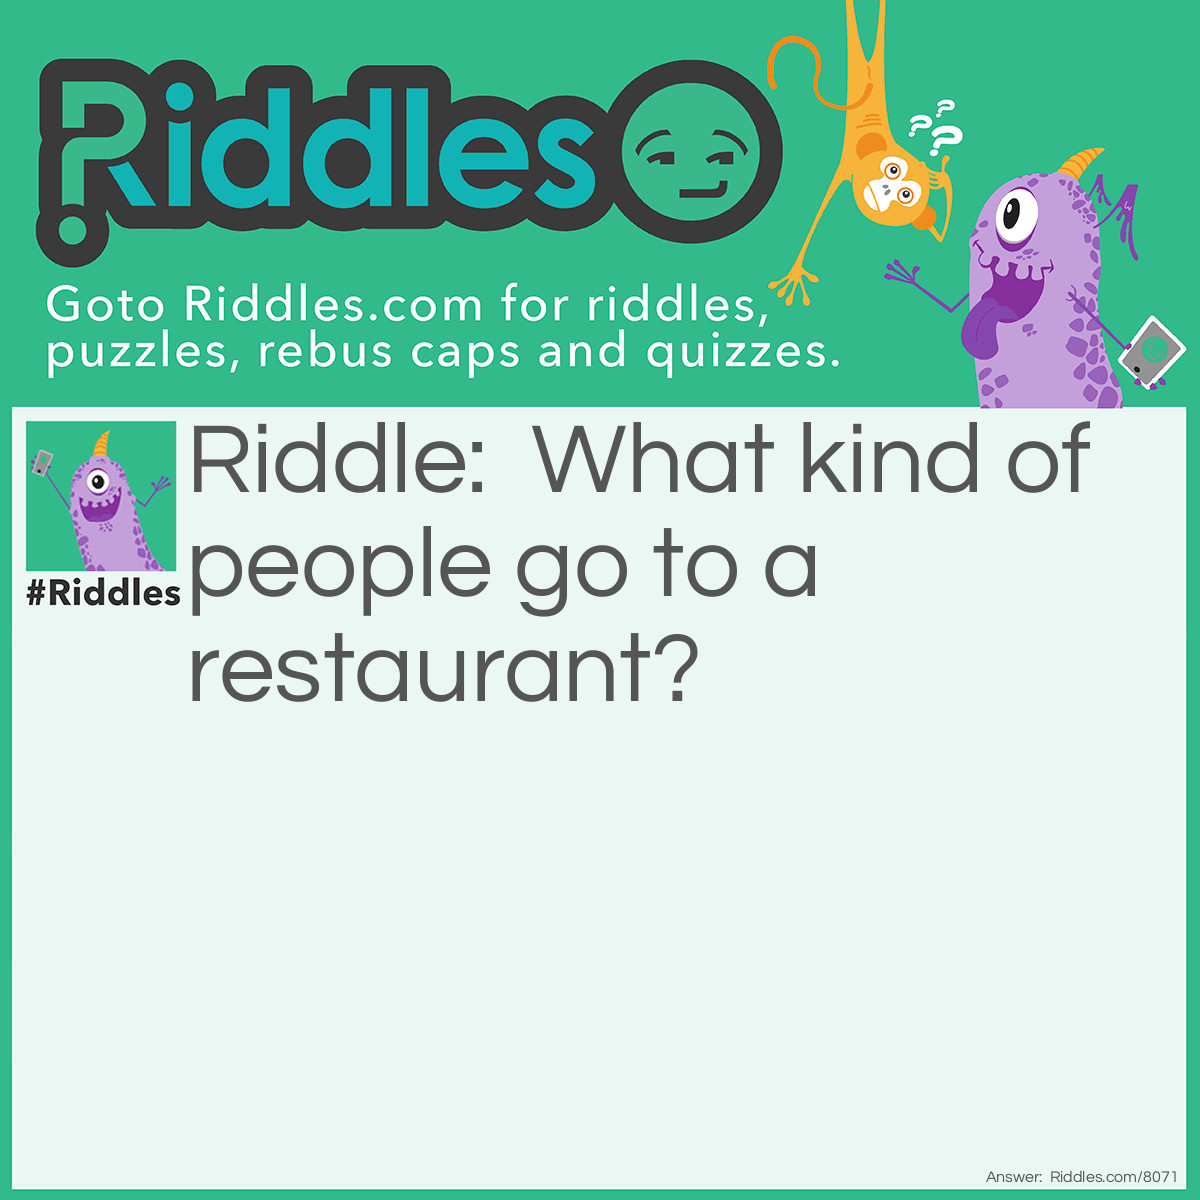 Riddle: What kind of people go to a restaurant? Answer: Hungry people.